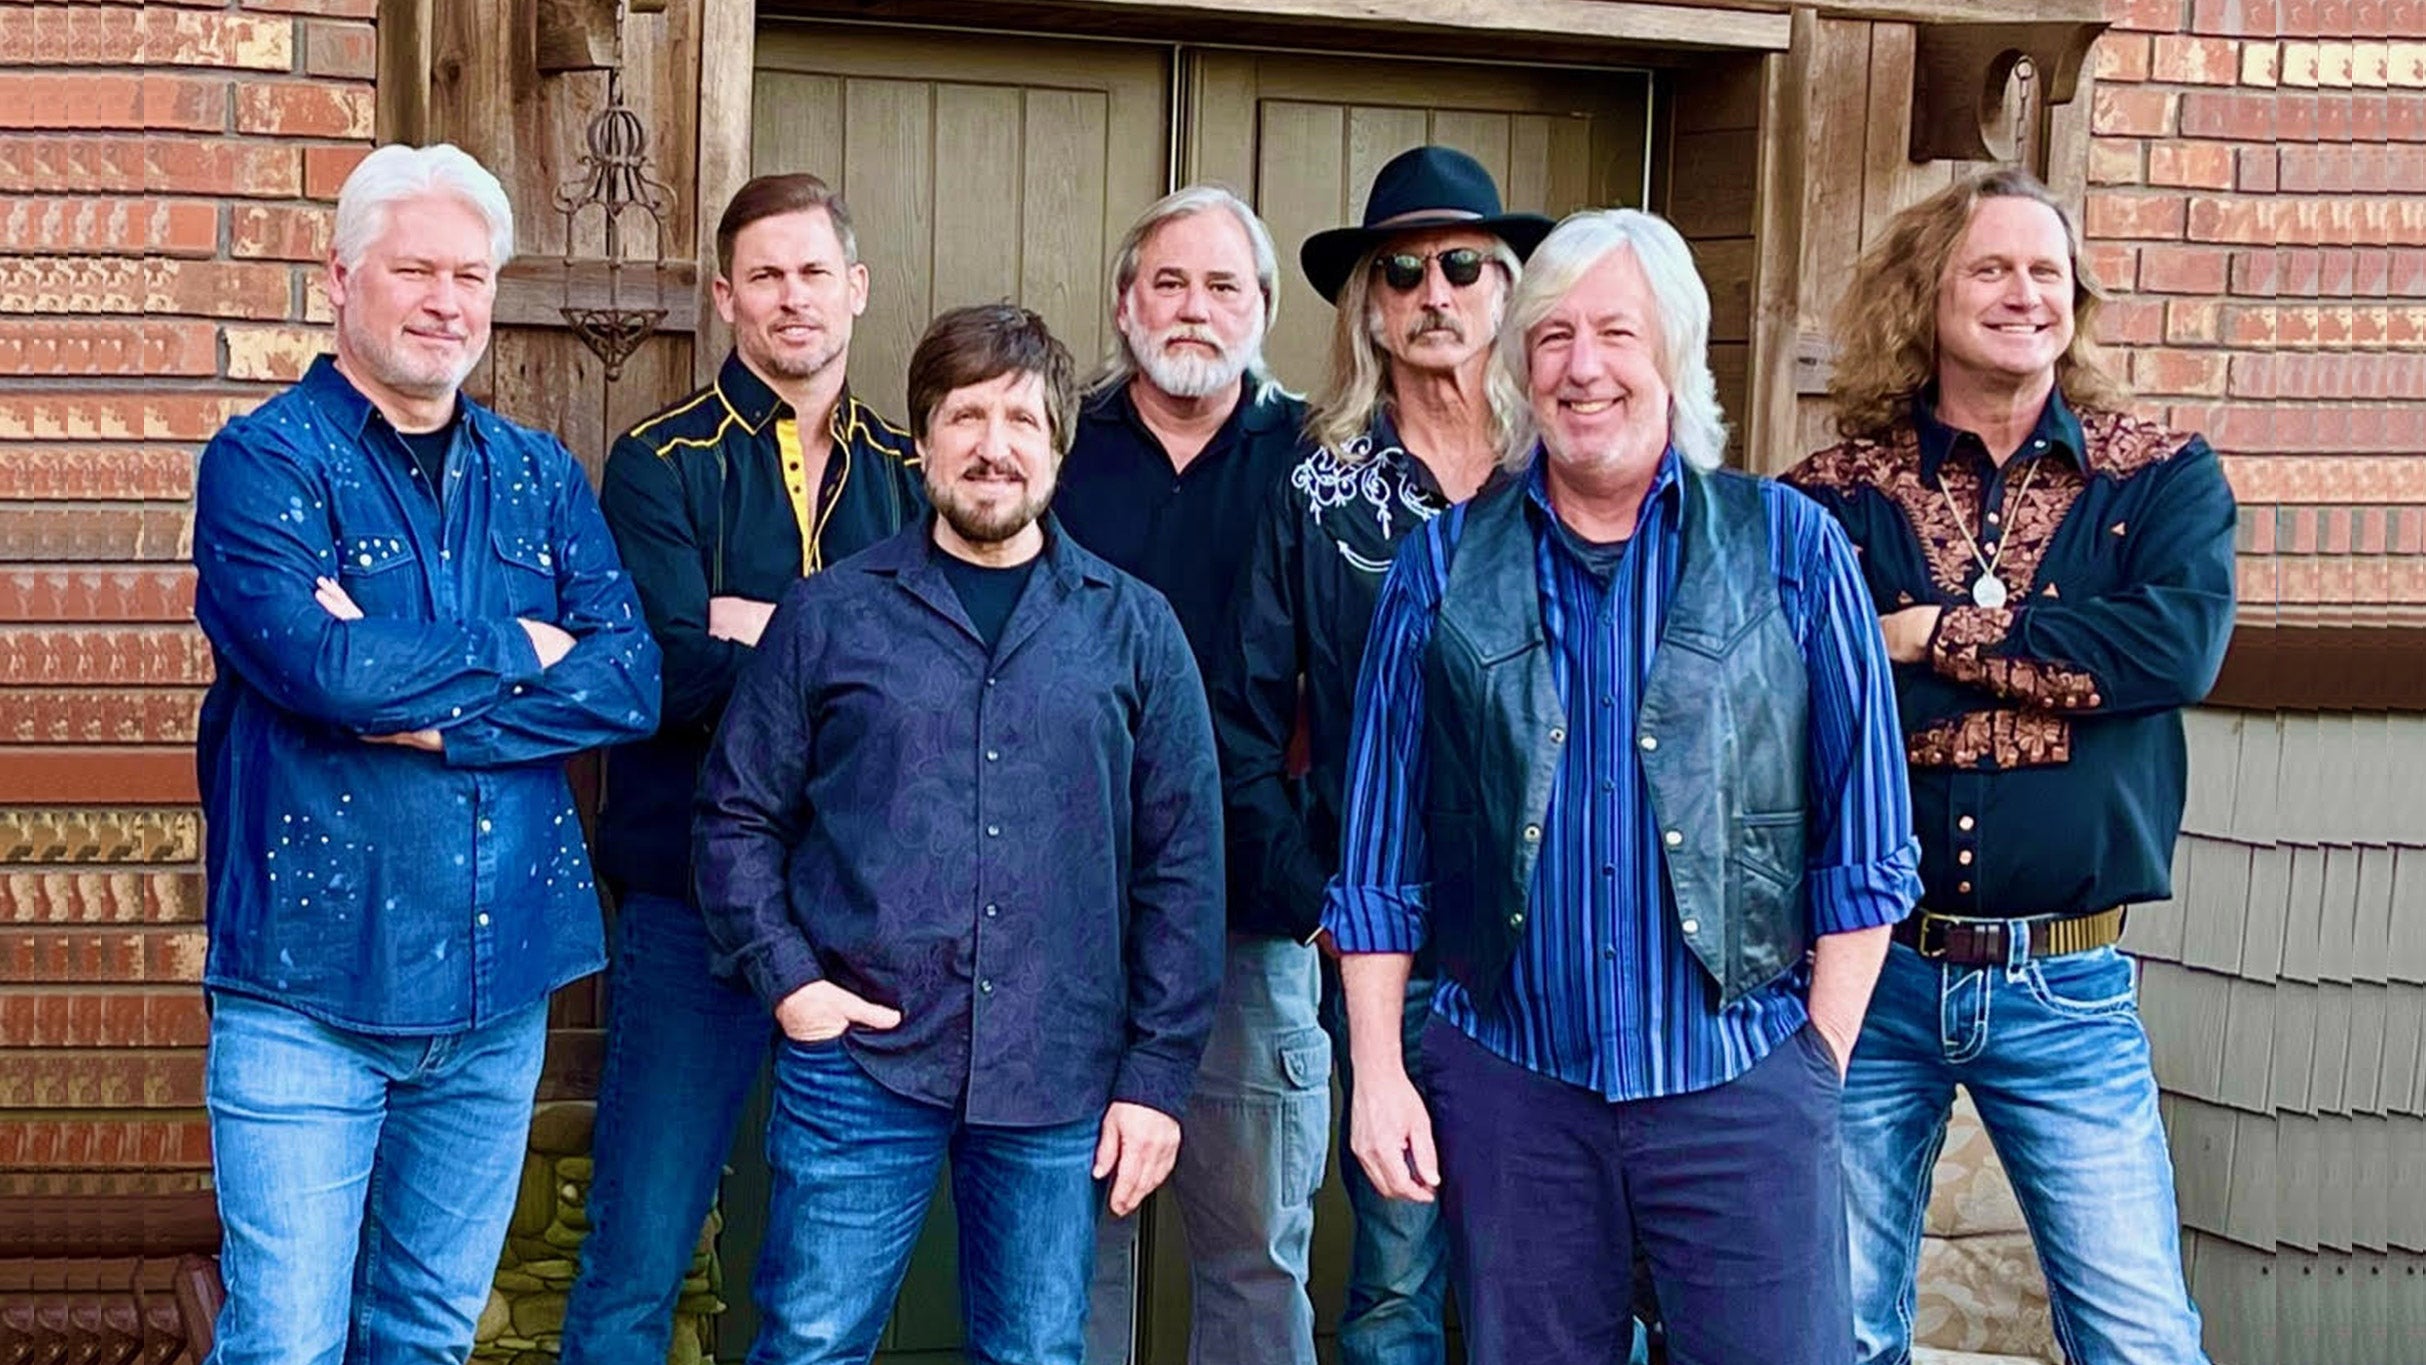 Brotherhood - Doobie Brothers Tribute Band in North Myrtle Beach promo photo for Citi® Cardmember Preferred presale offer code